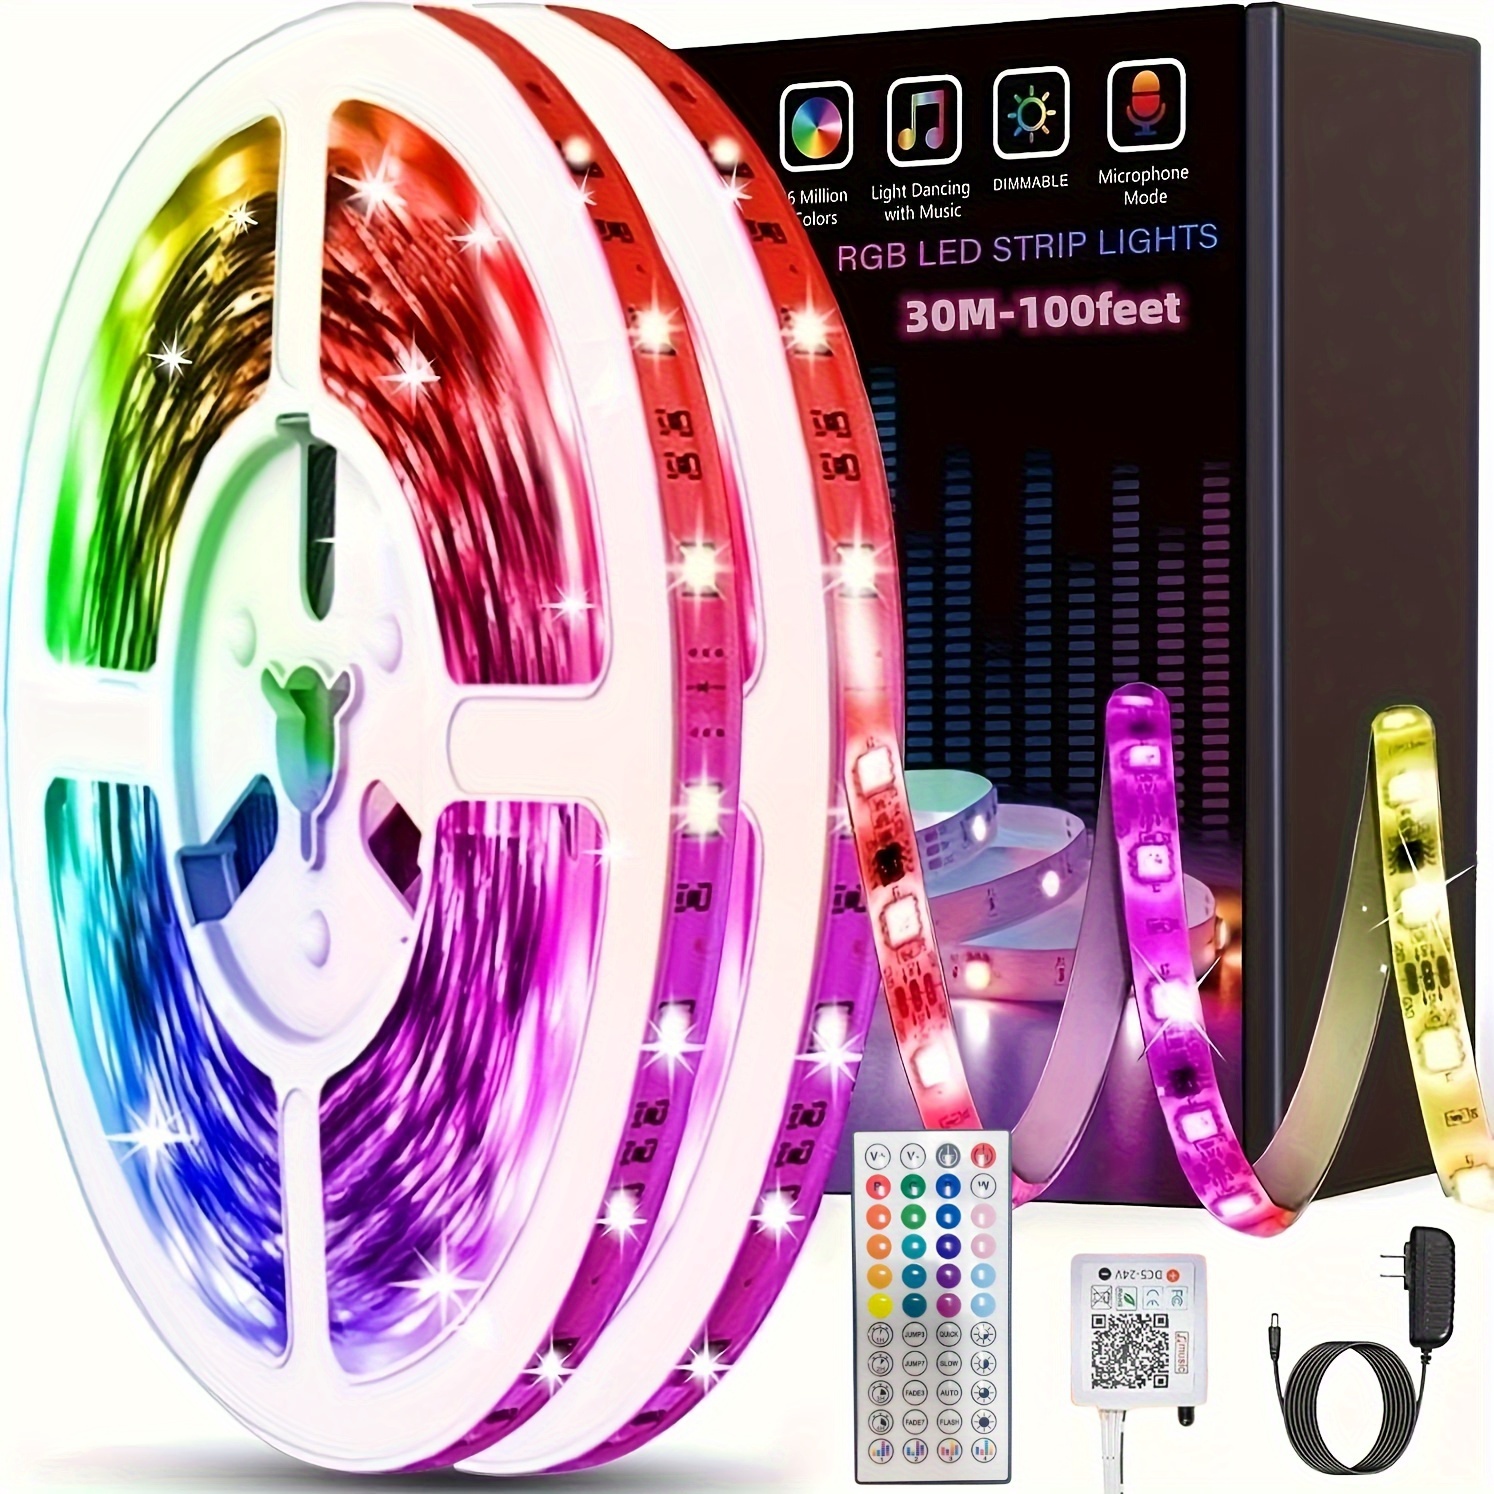 DAYBETTER Smart WiFi Led Strip Lights Work with Alexa Google Assistant App  Control, Suitable for christmas decorations, festival, Party, 12V -32.8